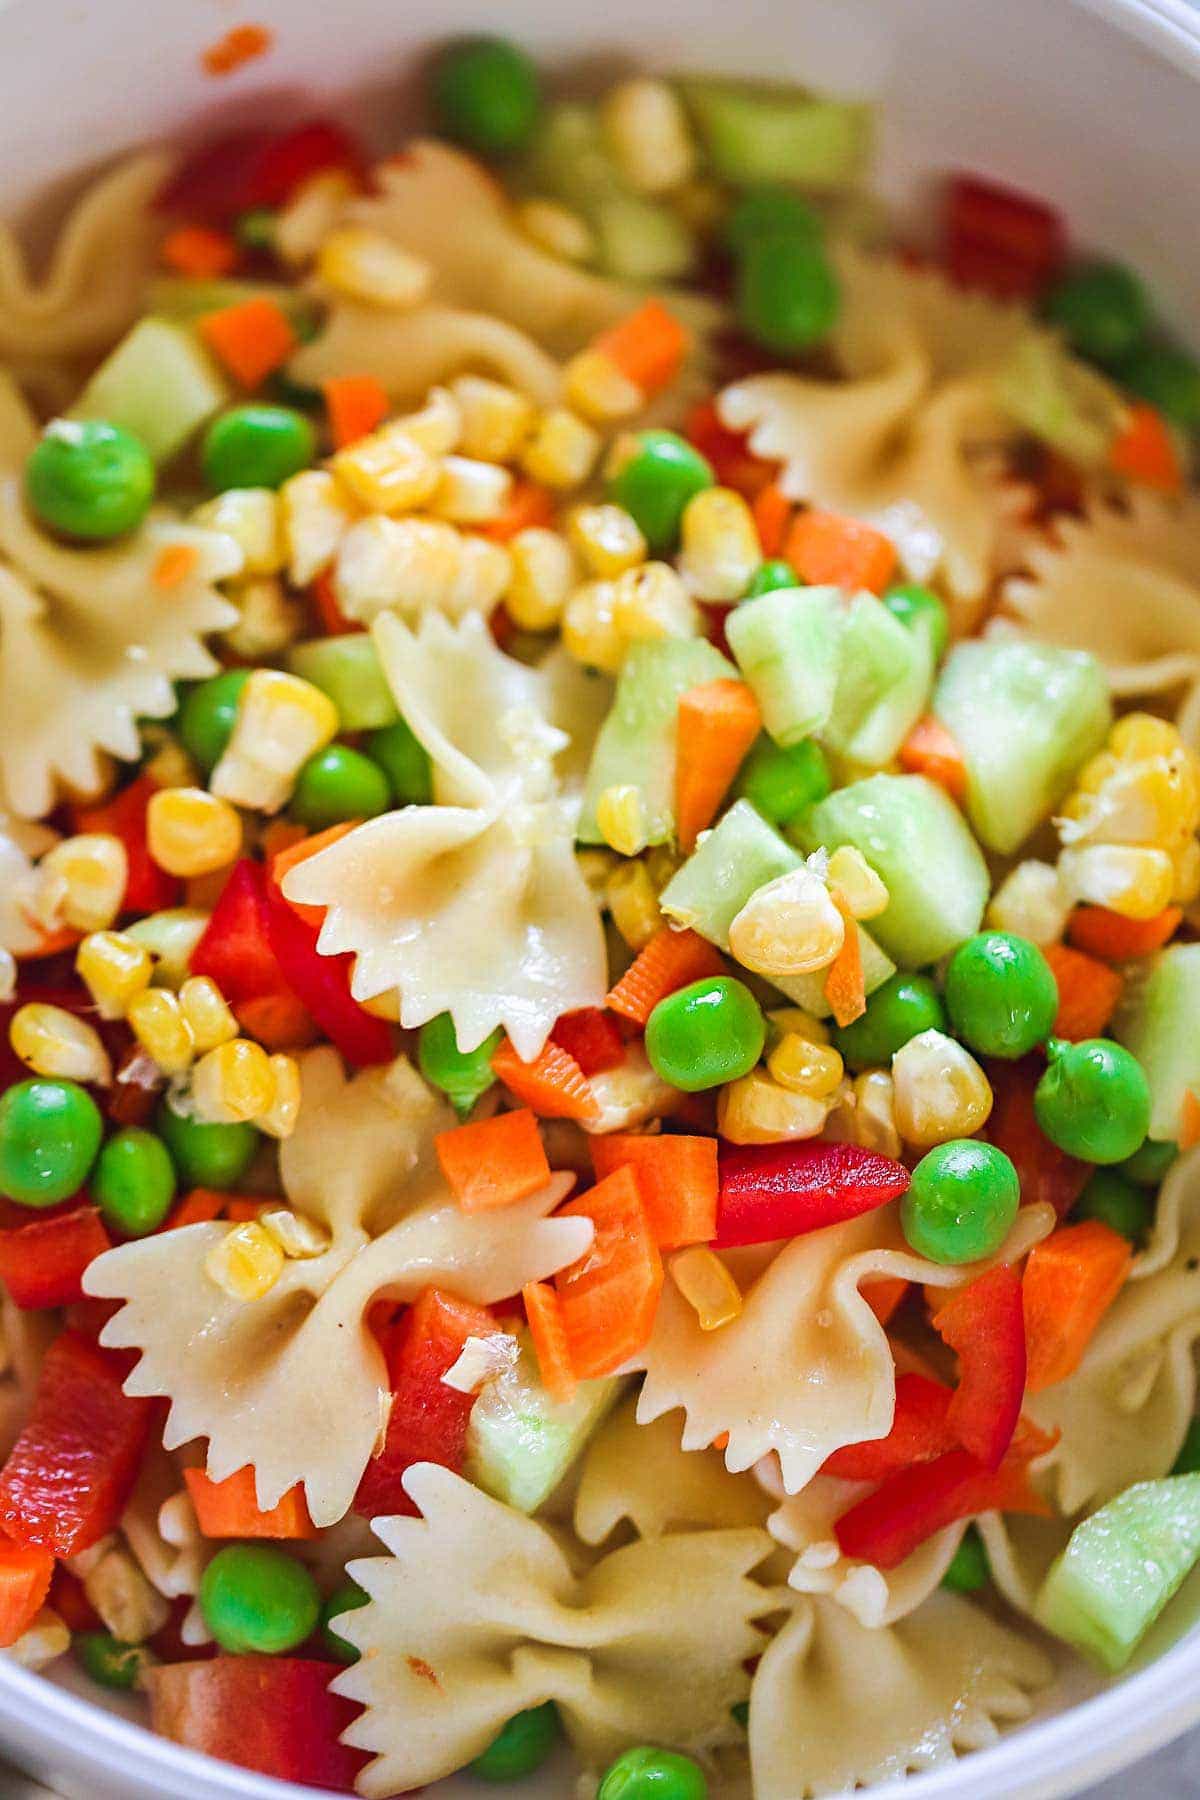 A close up shot of the pasta salad to show the ingredients